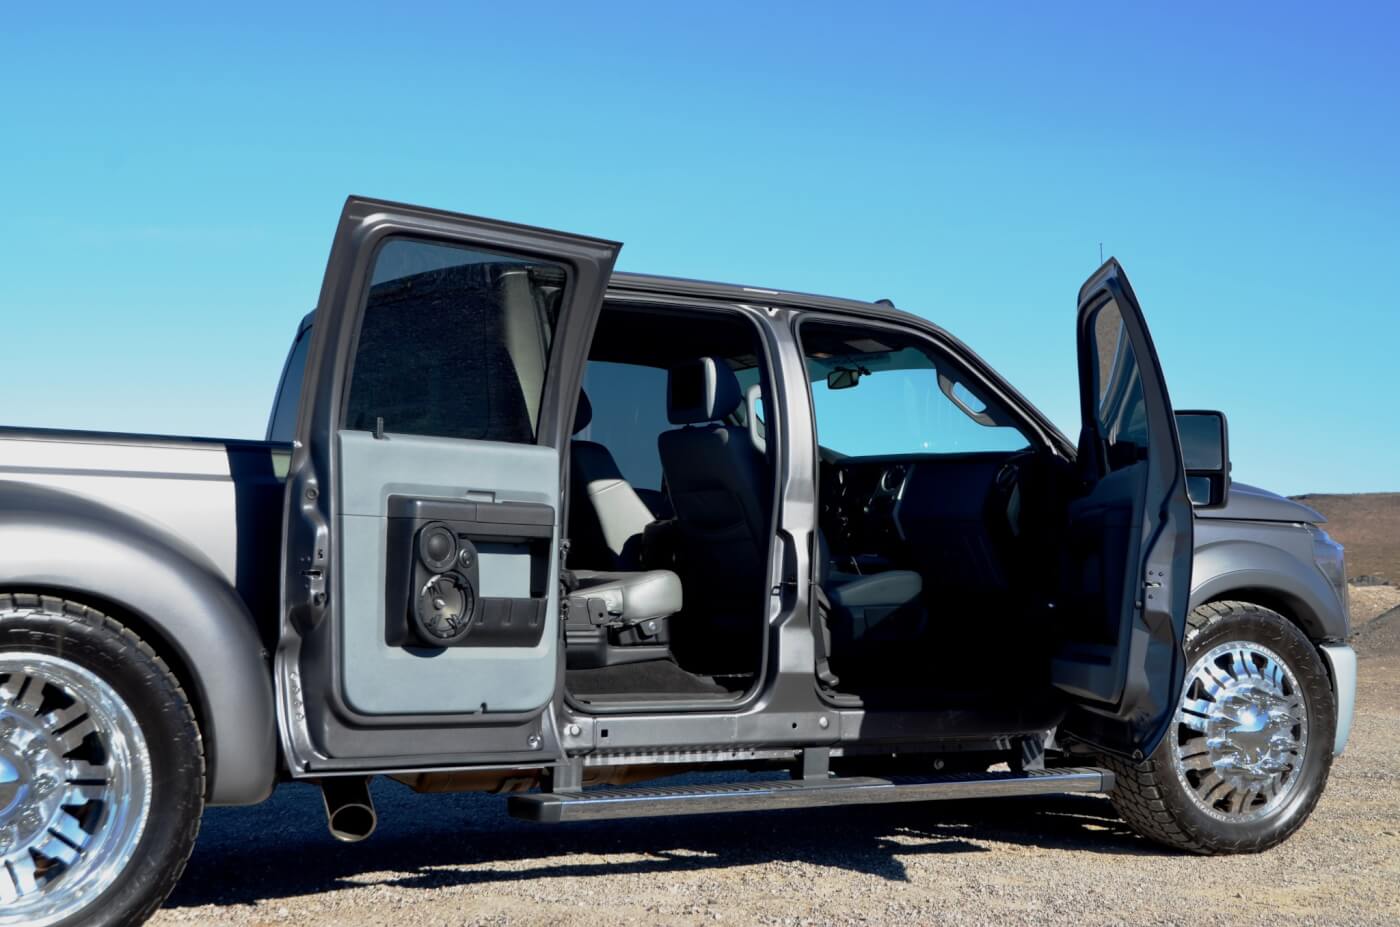 Extensive work was done to reinforce the rear doors which eliminated any sagging when open, which is common with aftermarket suicide door modifications. 